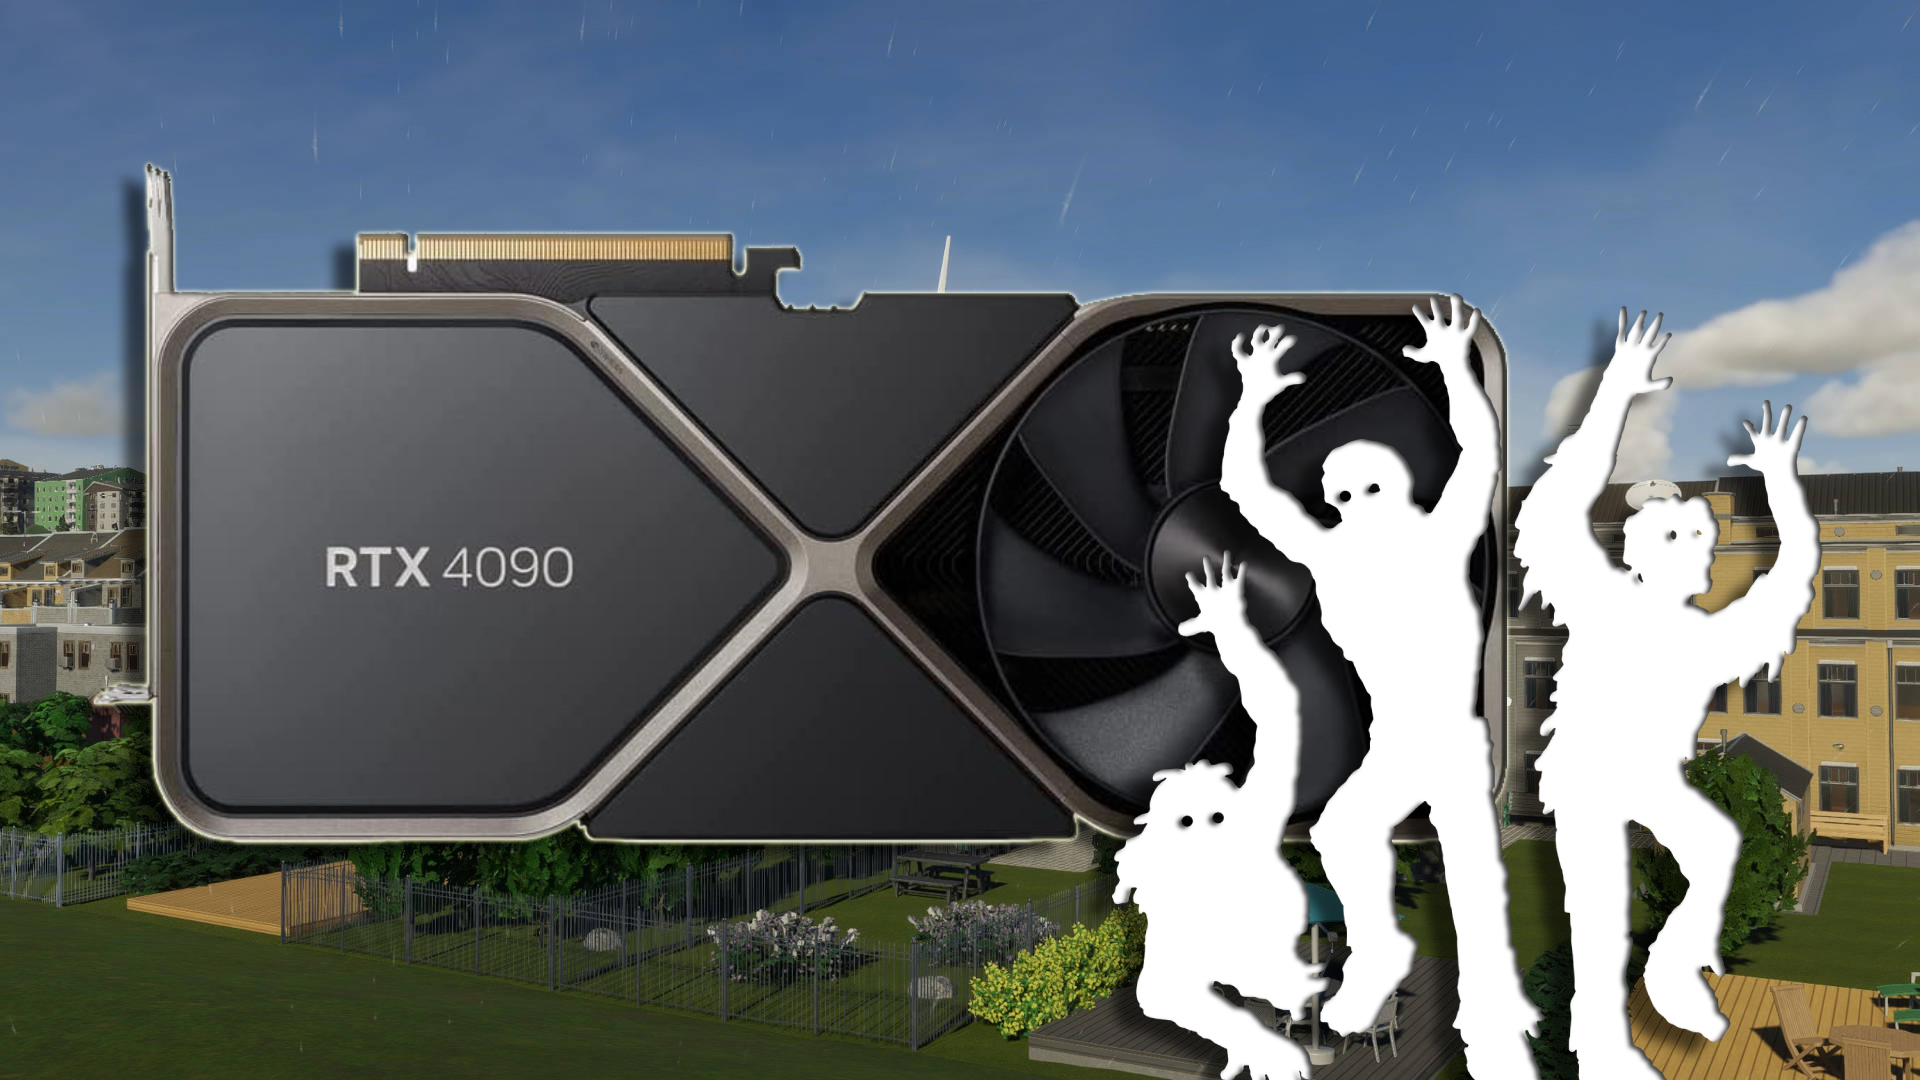 Even the Nvidia GeForce RTX 4090 isn't safe from Cities Skylines 2